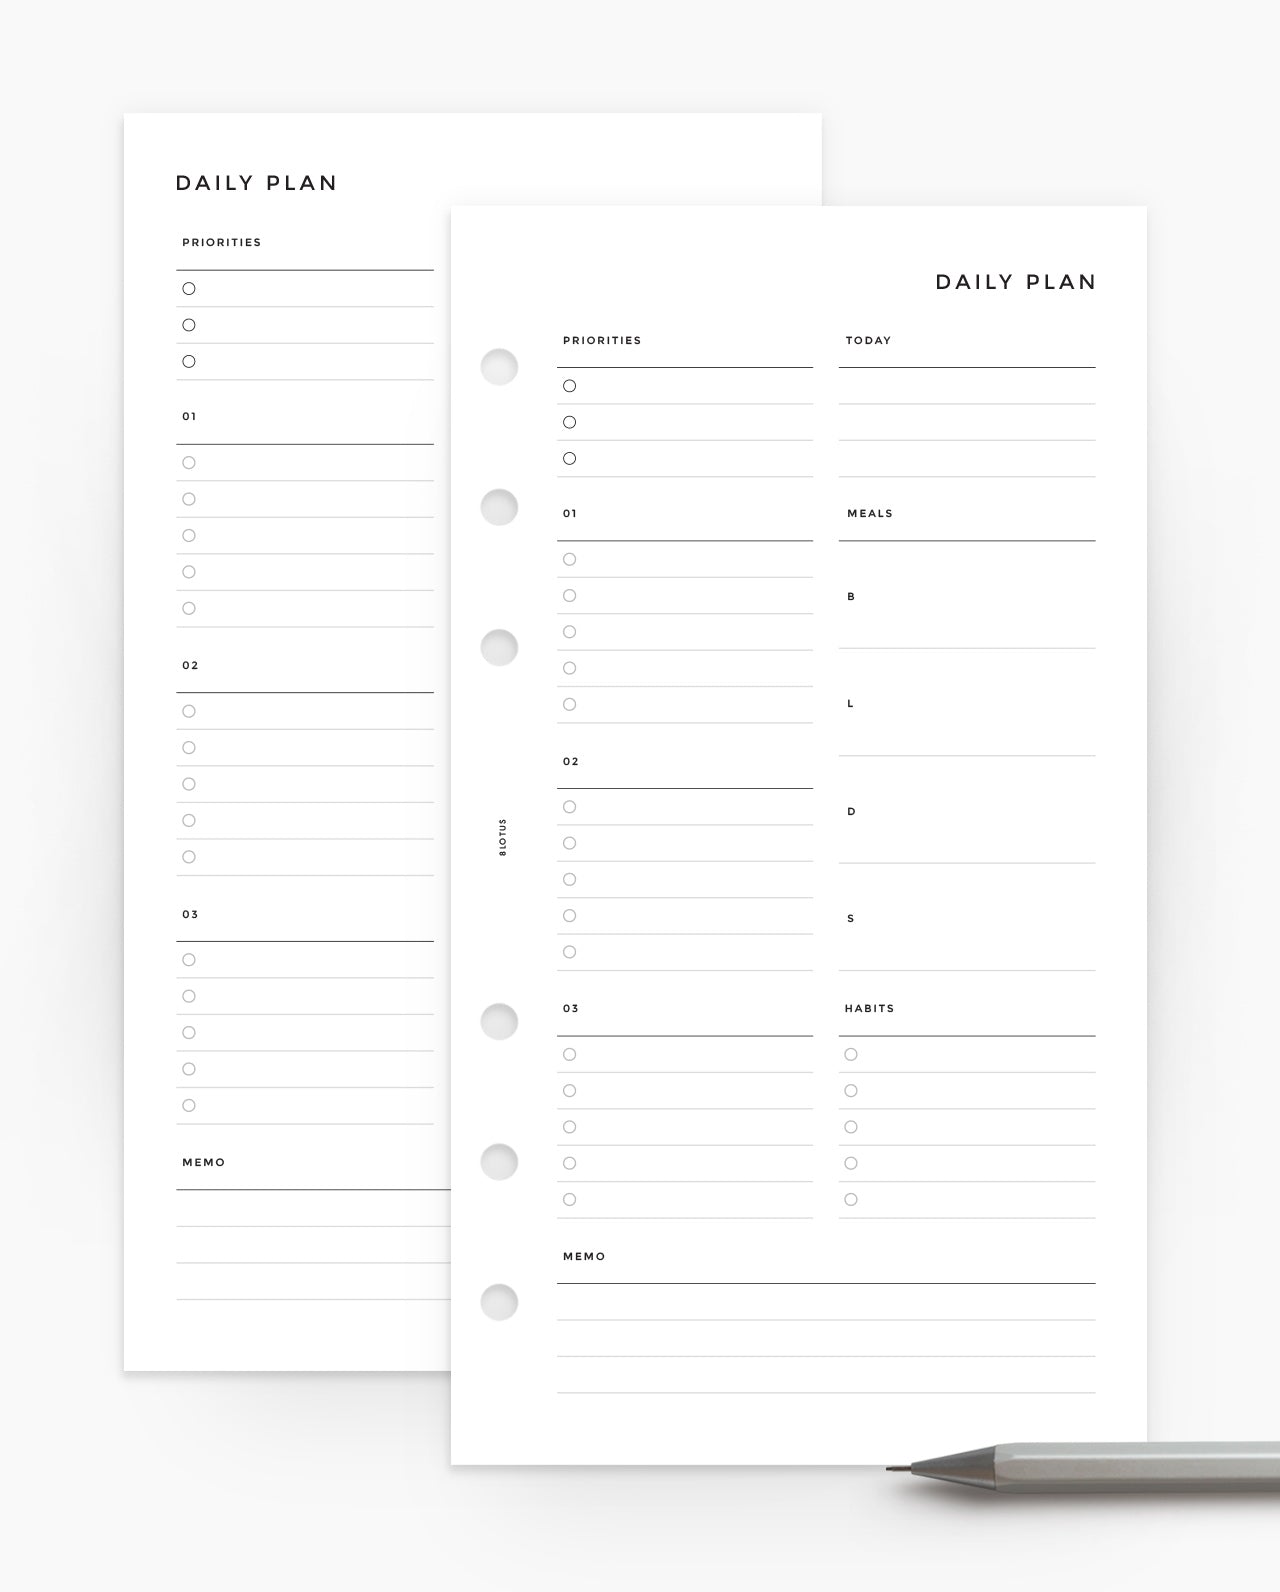 MN017 - DAILY PLANNER - LISTS, MENU, HABITS